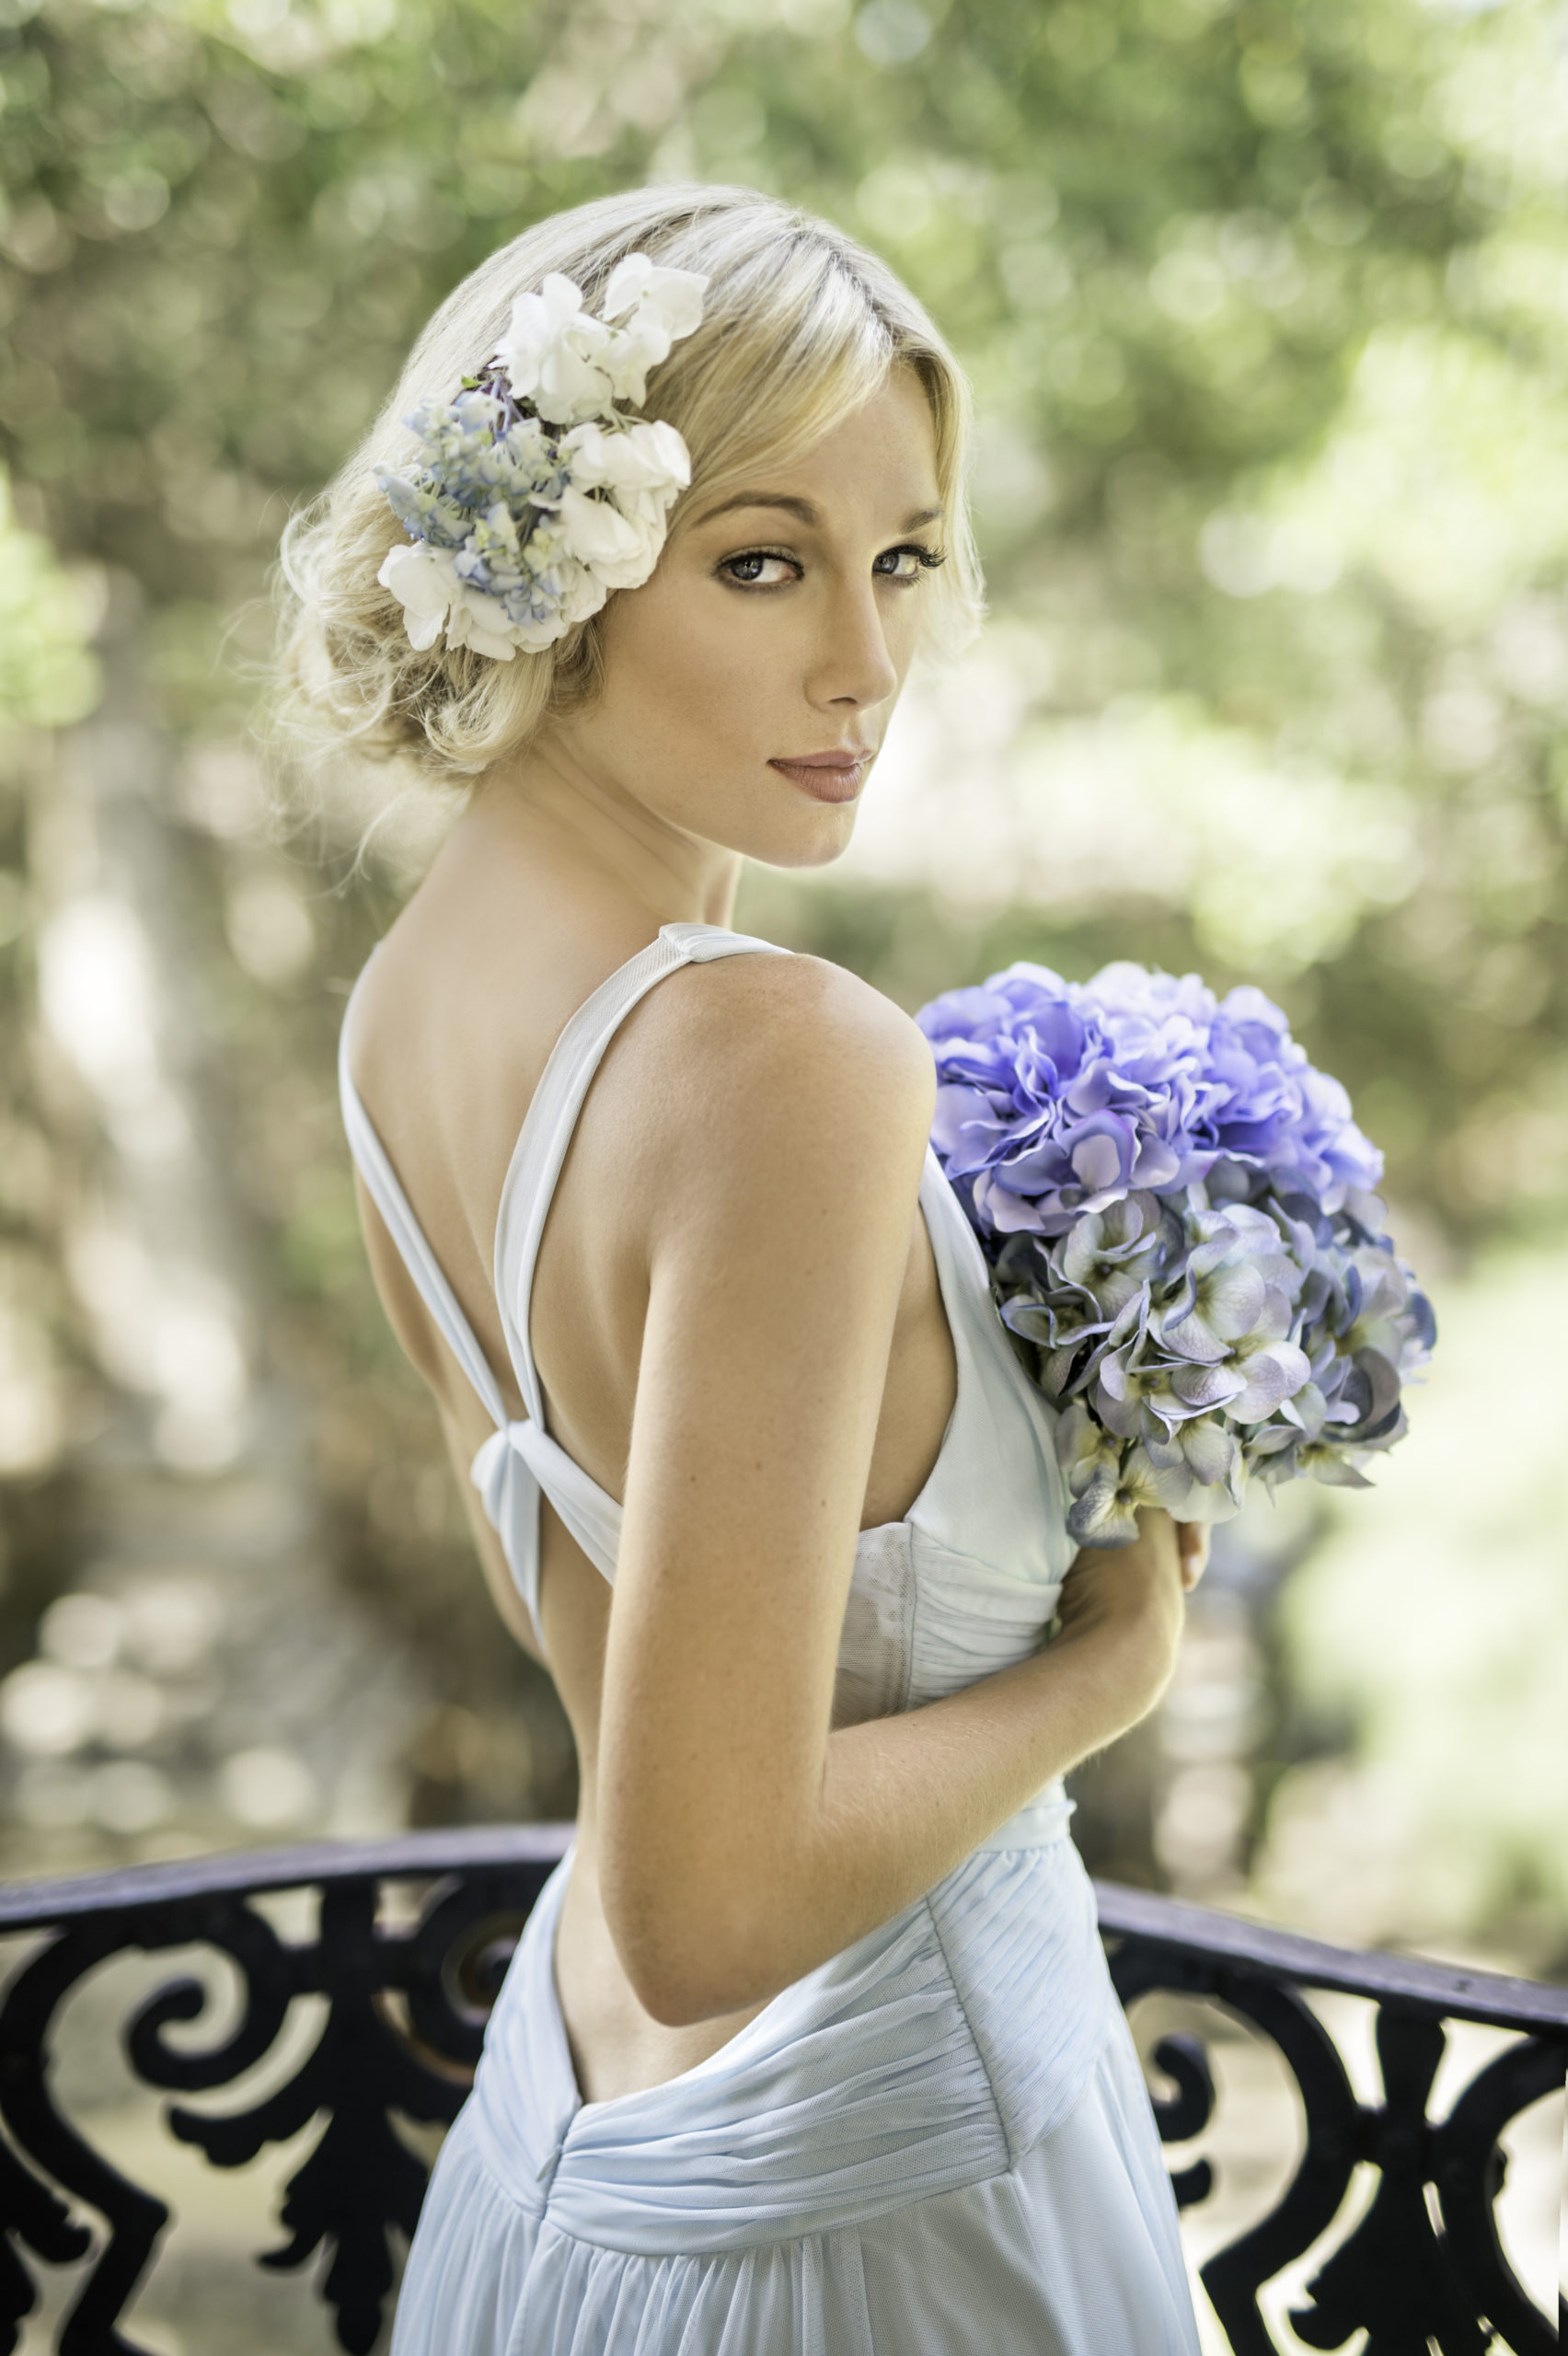 Woman with blond hair posing for camera looking over her shoulder holding a bouquet of flowers